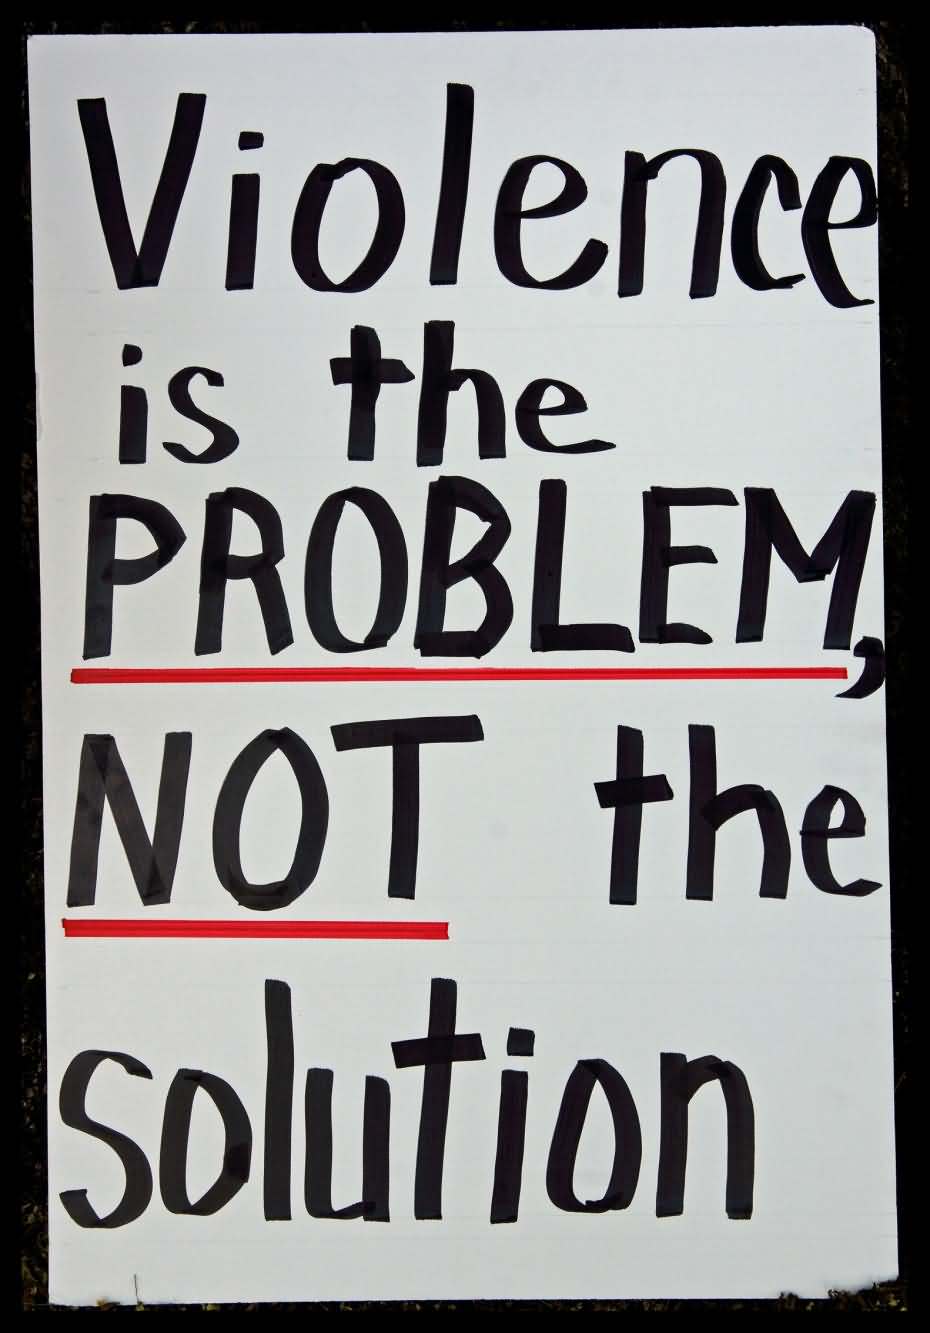 Violence is the problem not the solution